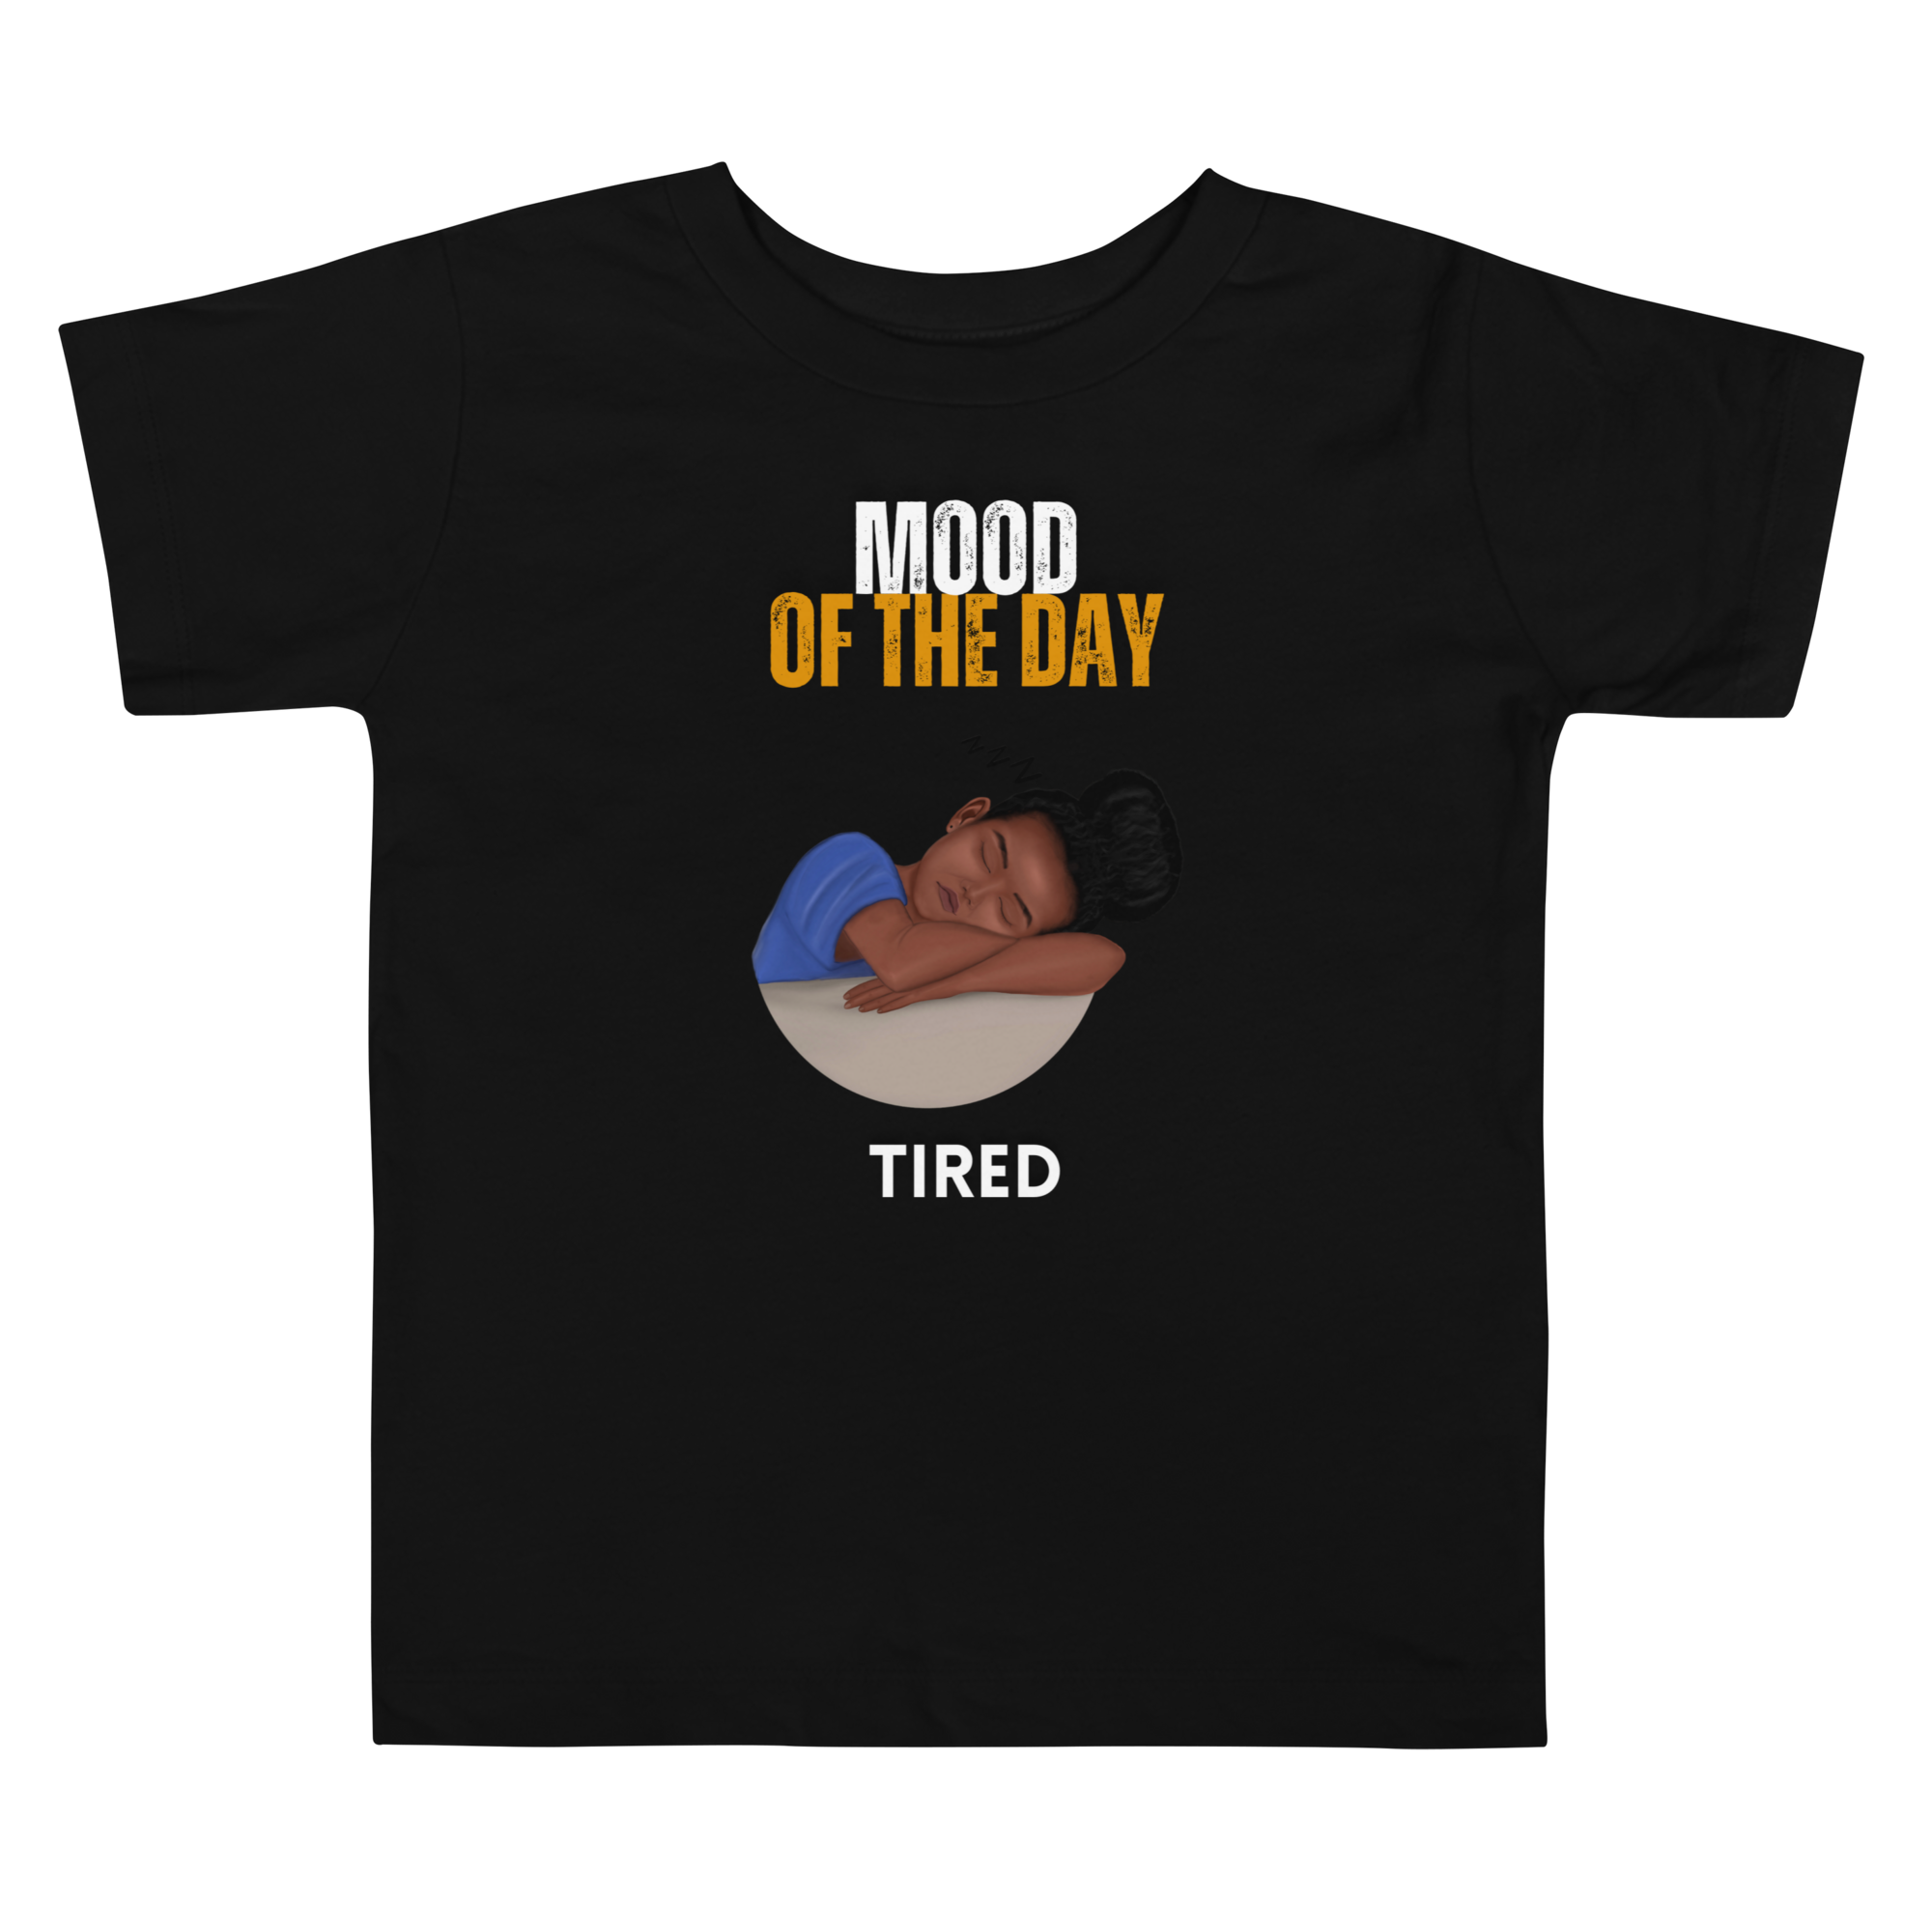 Toddler Mood of the Day T-shirt - Tired